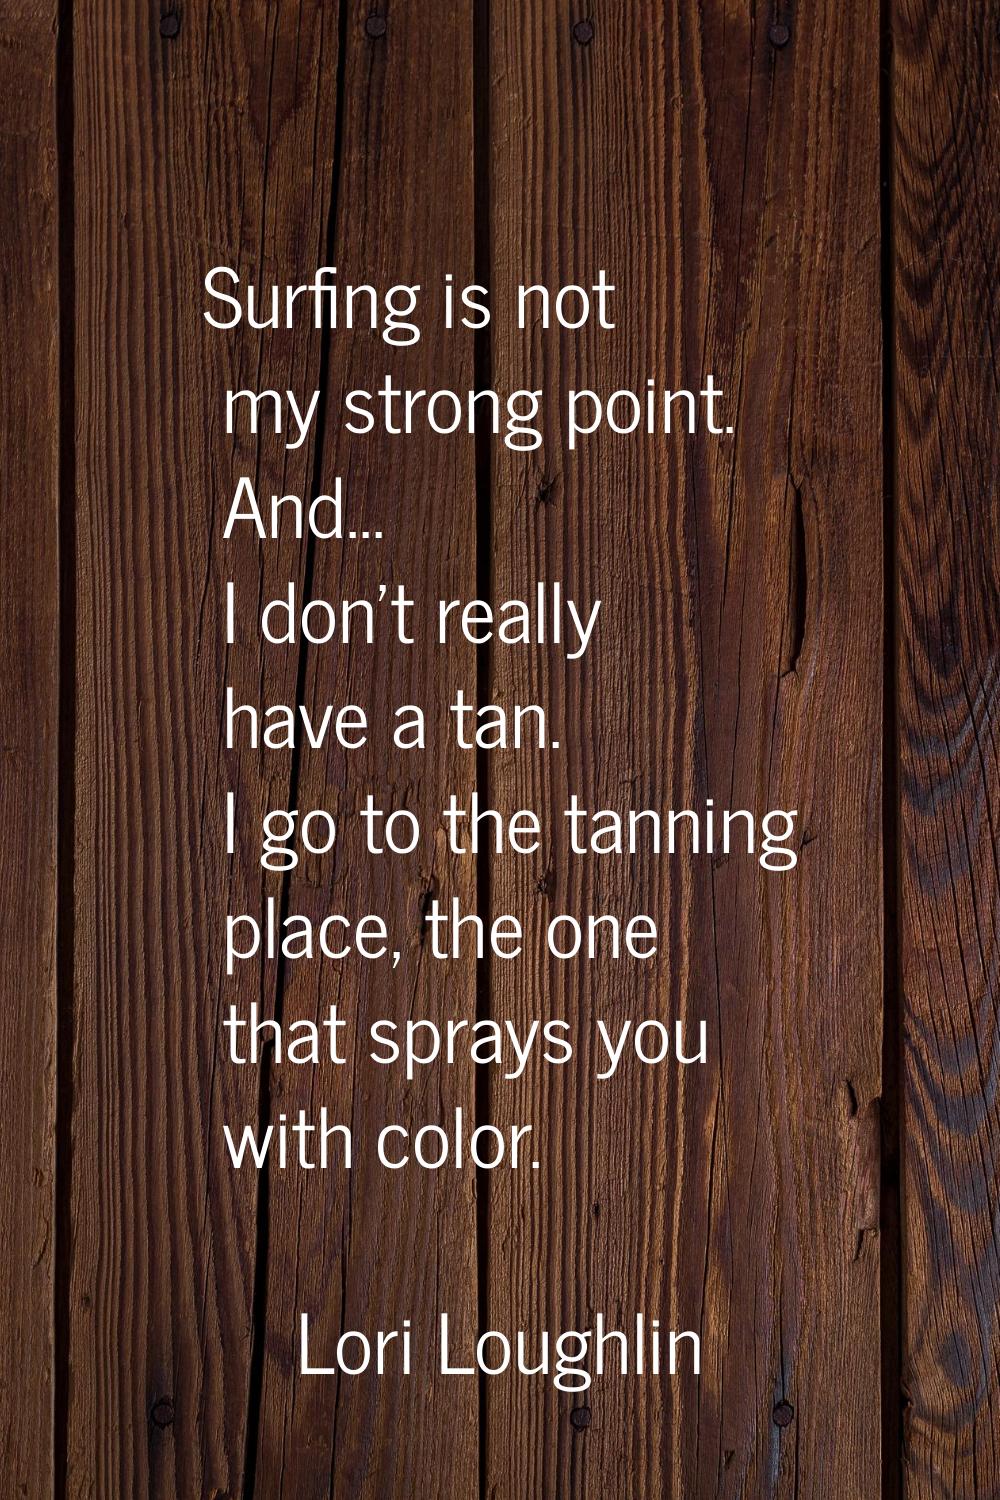 Surfing is not my strong point. And... I don't really have a tan. I go to the tanning place, the on